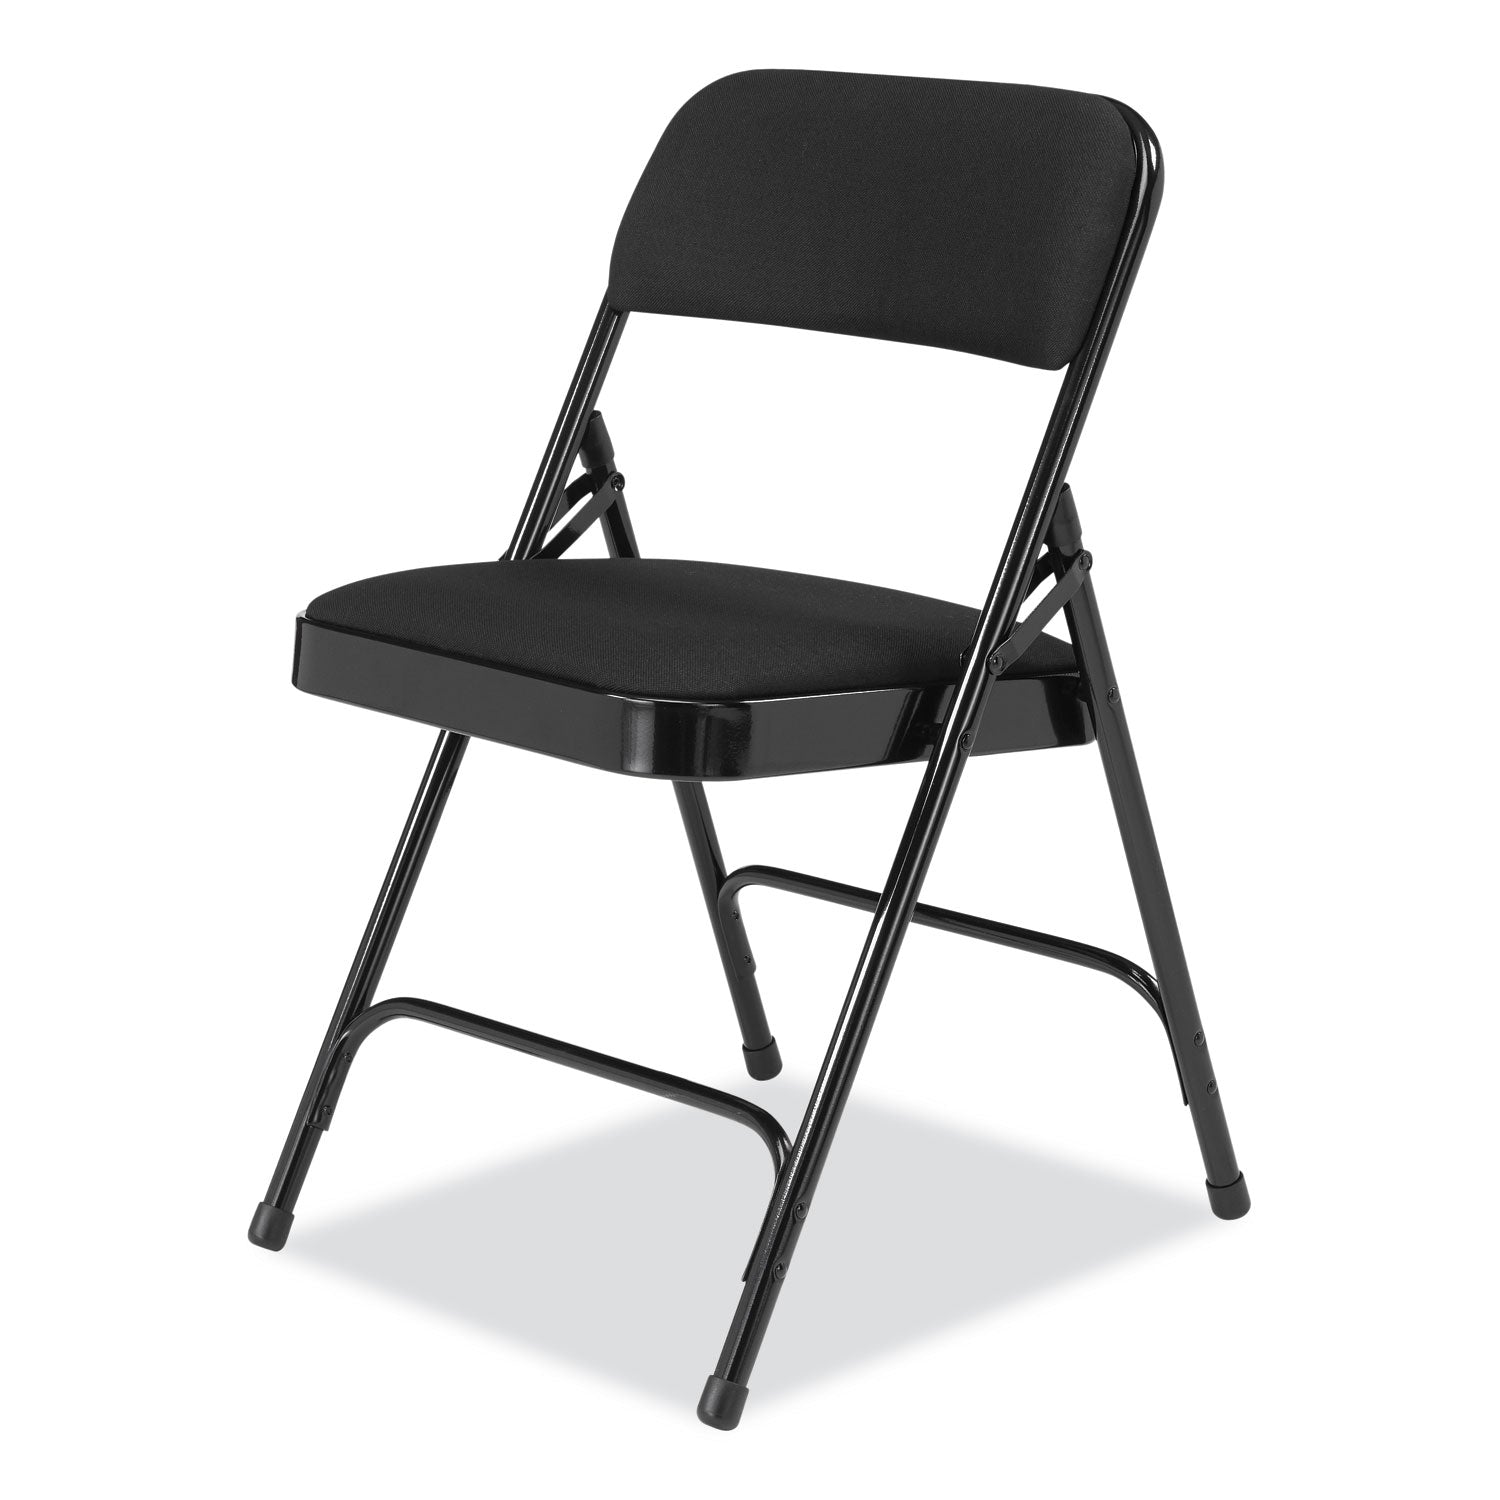 2200-series-fabric-dual-hinge-folding-chair-supports-500-lb-midnight-black-seat-back-black-base4-ctships-in-1-3-bus-days_nps2210 - 3